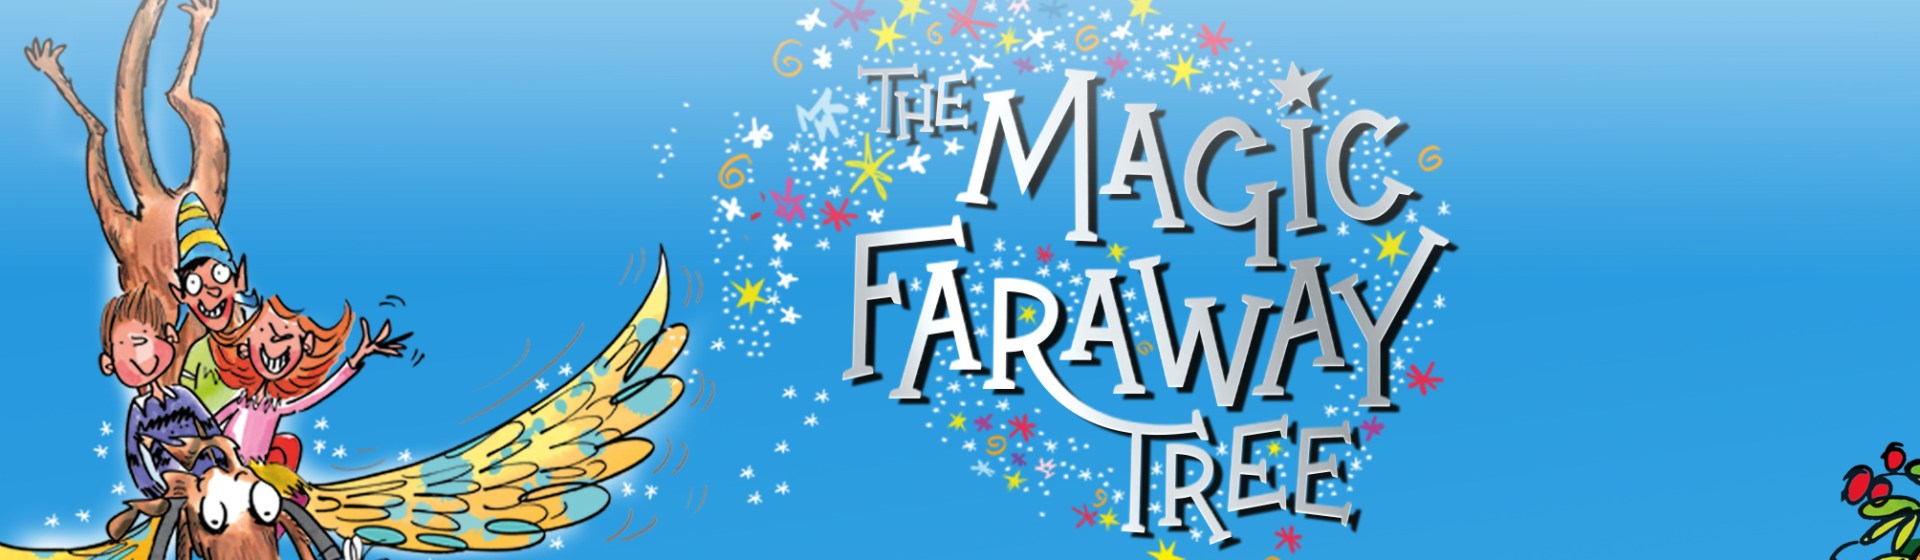 The Magic Faraway Tree Collection by Enid Blyton